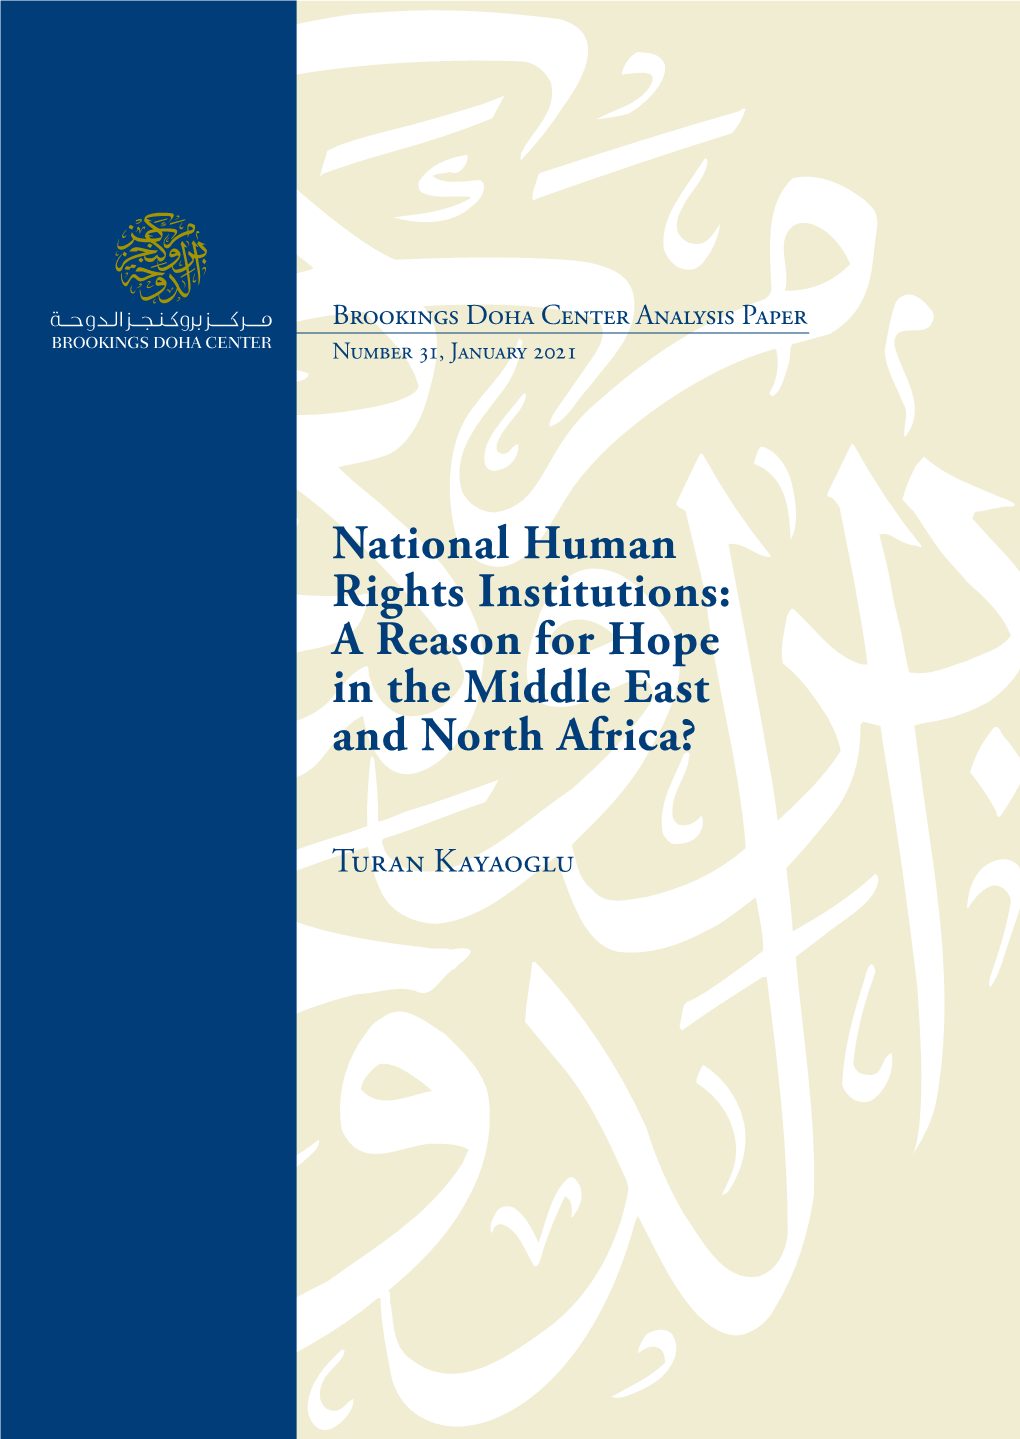 National Human Rights Institutions: a Reason for Hope in the Middle East and North Africa?